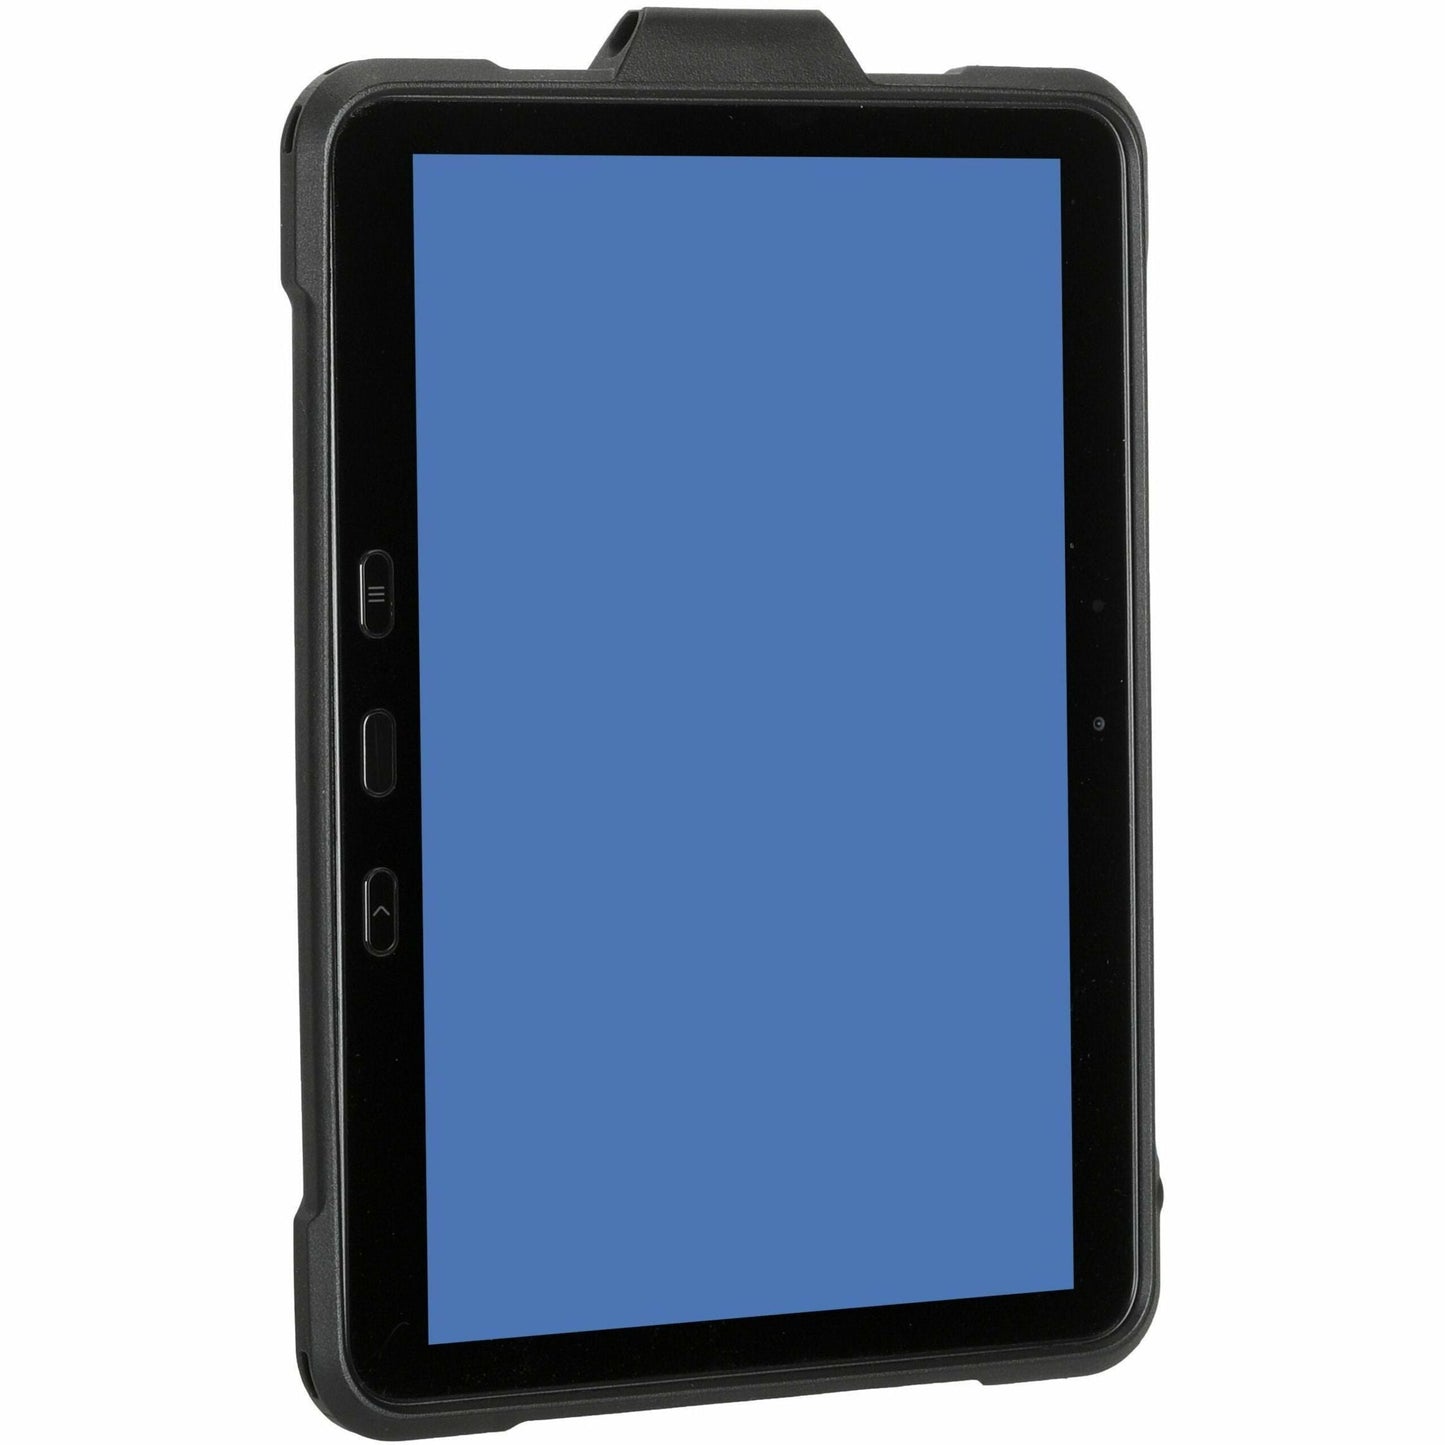 Targus Field-Ready THD501GLZ Rugged Carrying Case Samsung Galaxy Tab Active Pro Tablet - Black